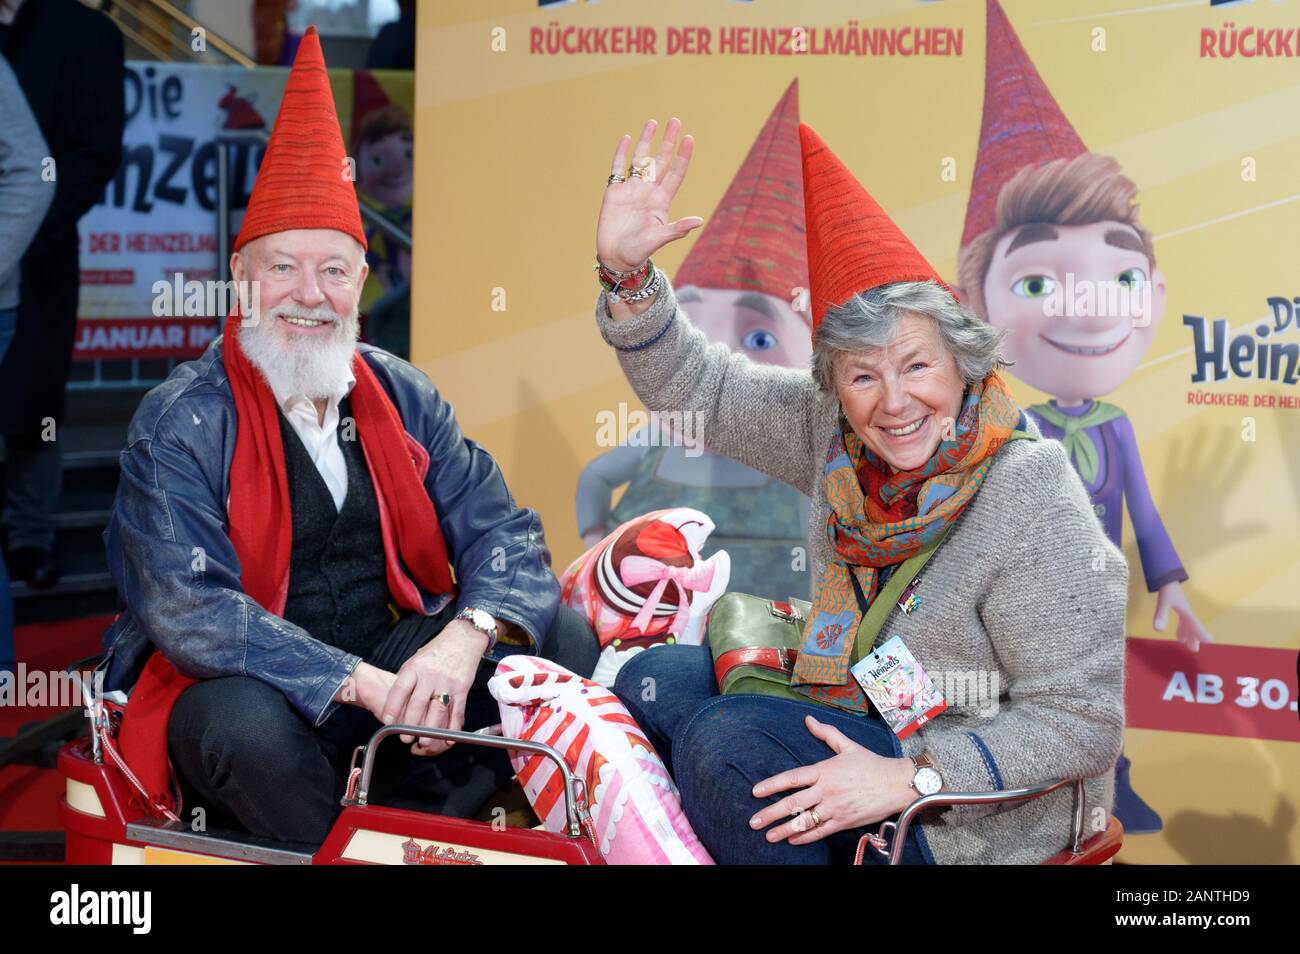 Cologne, Germany. 19th Jan, 2020. The actors Bill Mockridge (l) and Margie Kinsky (r) sit in a children's train before the premiere of the film 'The Heinzels - Return of the Brown Men'. The animated film will start in the cinemas on 30.01.2020. Credit: Henning Kaiser/dpa/Alamy Live News Stock Photo